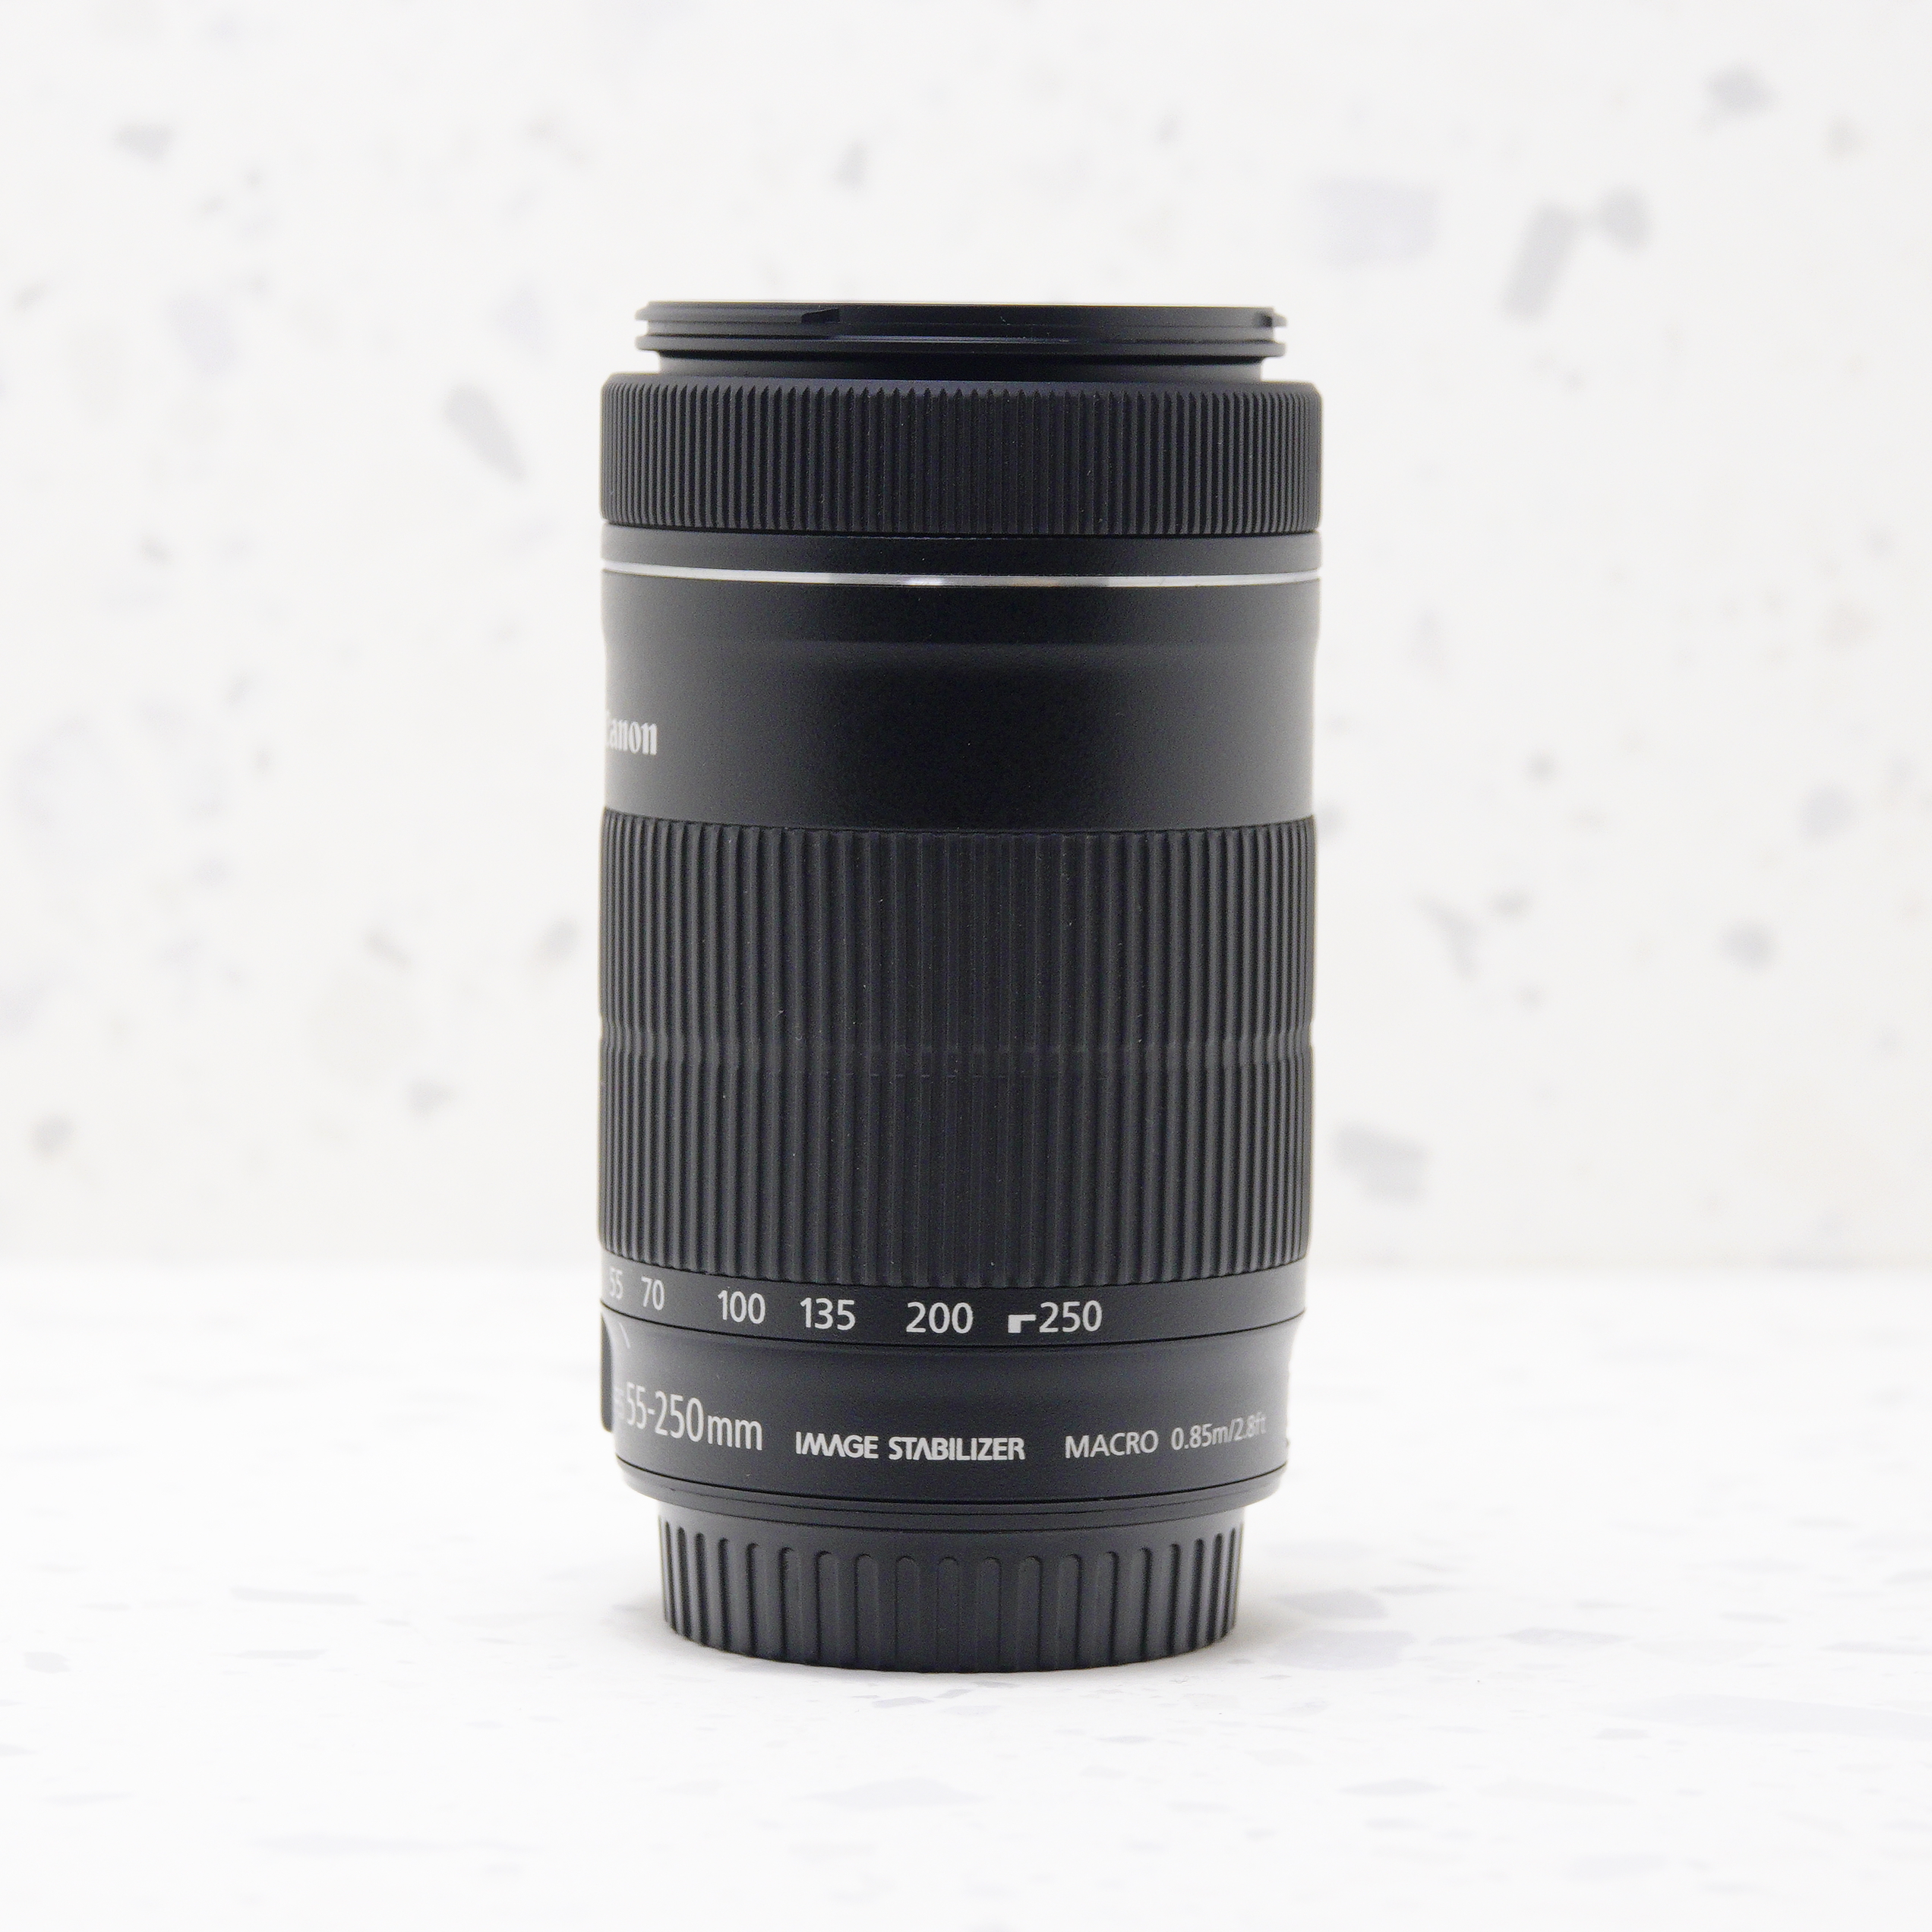 Canon EF-S 55-250mm f/4-5.6 IS STM - USADO